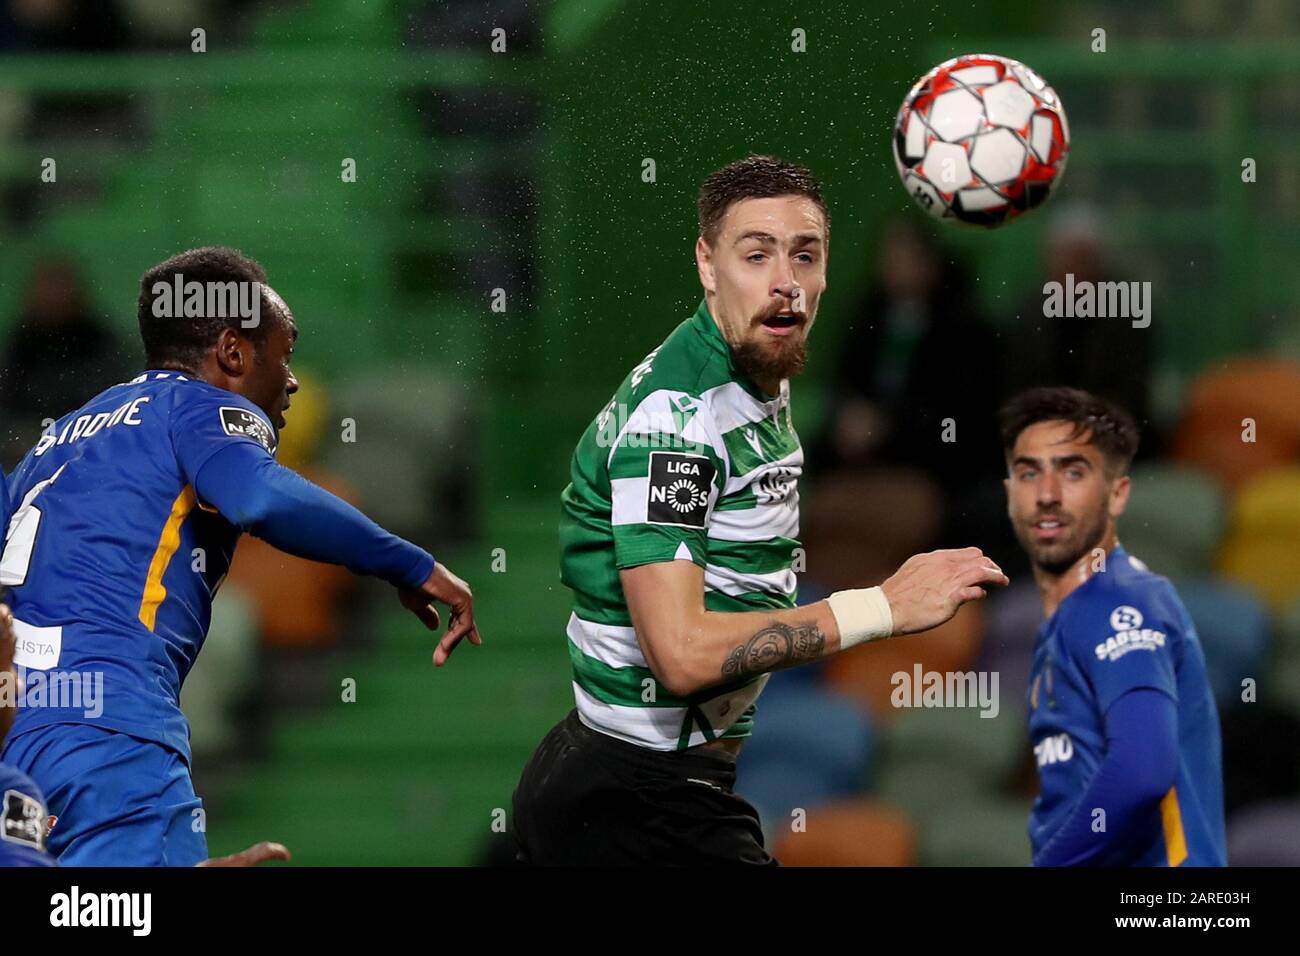 Lisbon. 27th Jan, 2020. Sebastian Coates (C) of Sporting CP competes during the Portuguese League football match between Sporting CP and CS Maritimo at Jose Alvalade stadium in Lisbon, Portugal on Jan. 27, 2020. Credit: Pedro Fiuza/Xinhua/Alamy Live News Stock Photo